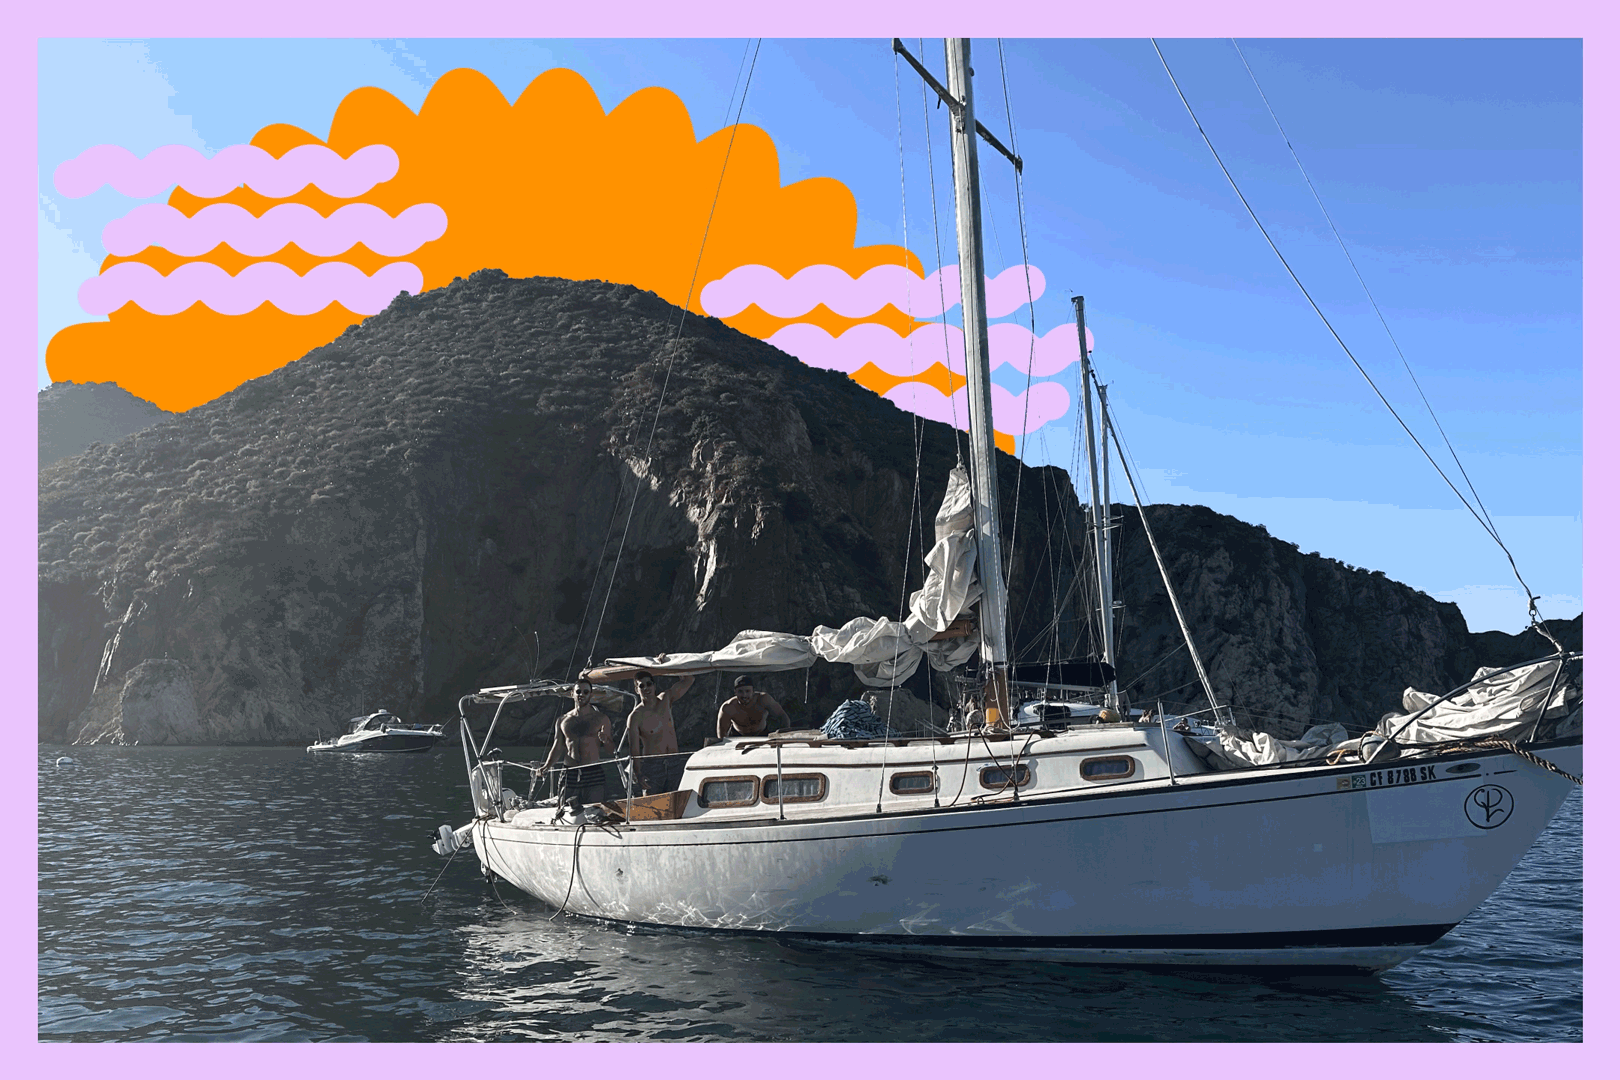 Charmony sits at her mooring at Catalina’s Button Shell beach